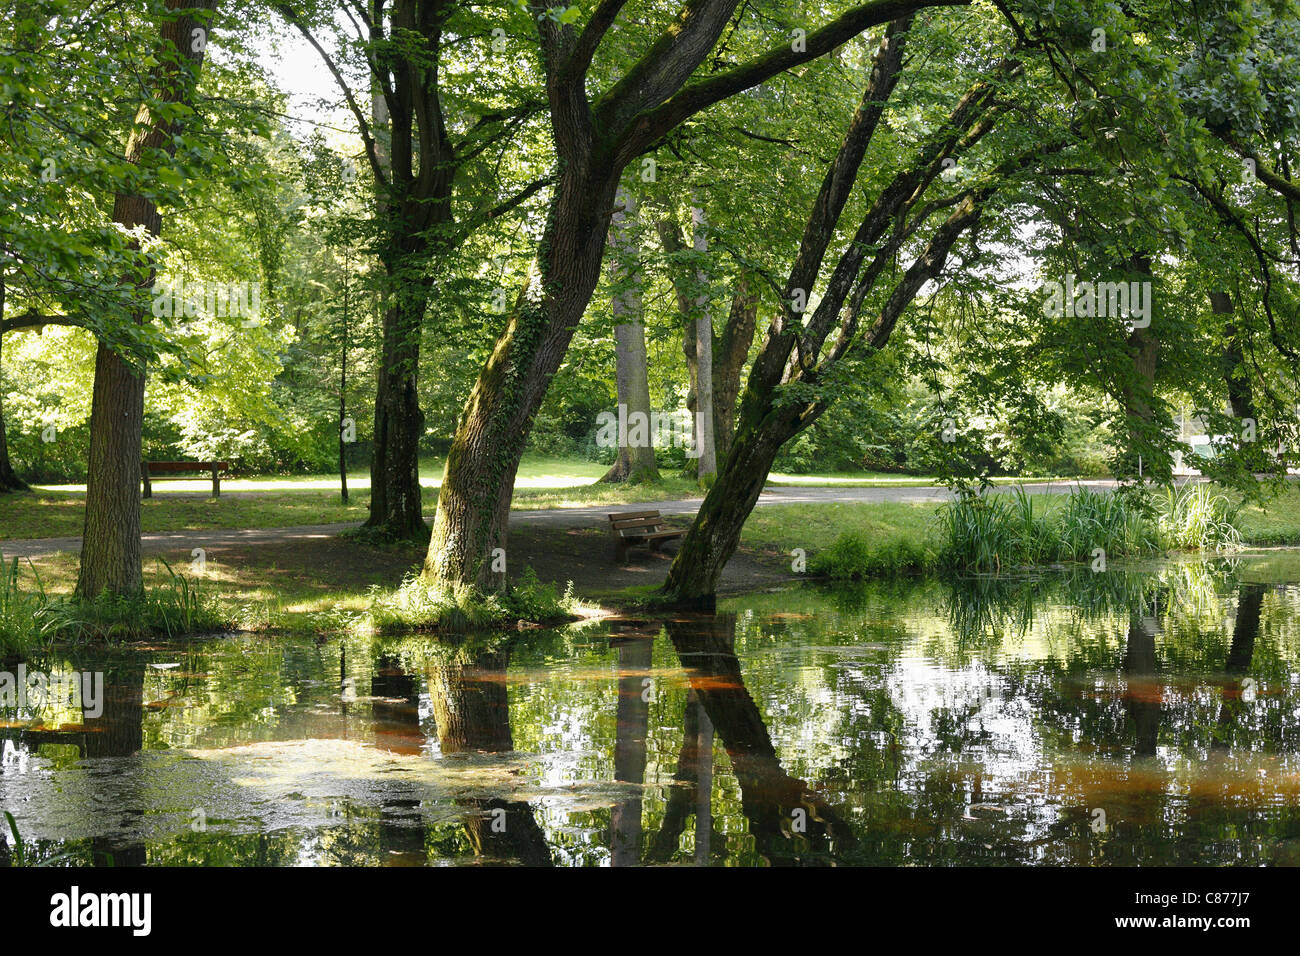 Germany, Bavaria, Upper Bavaria, Bad Aibling, View of trees in spa garden Stock Photo